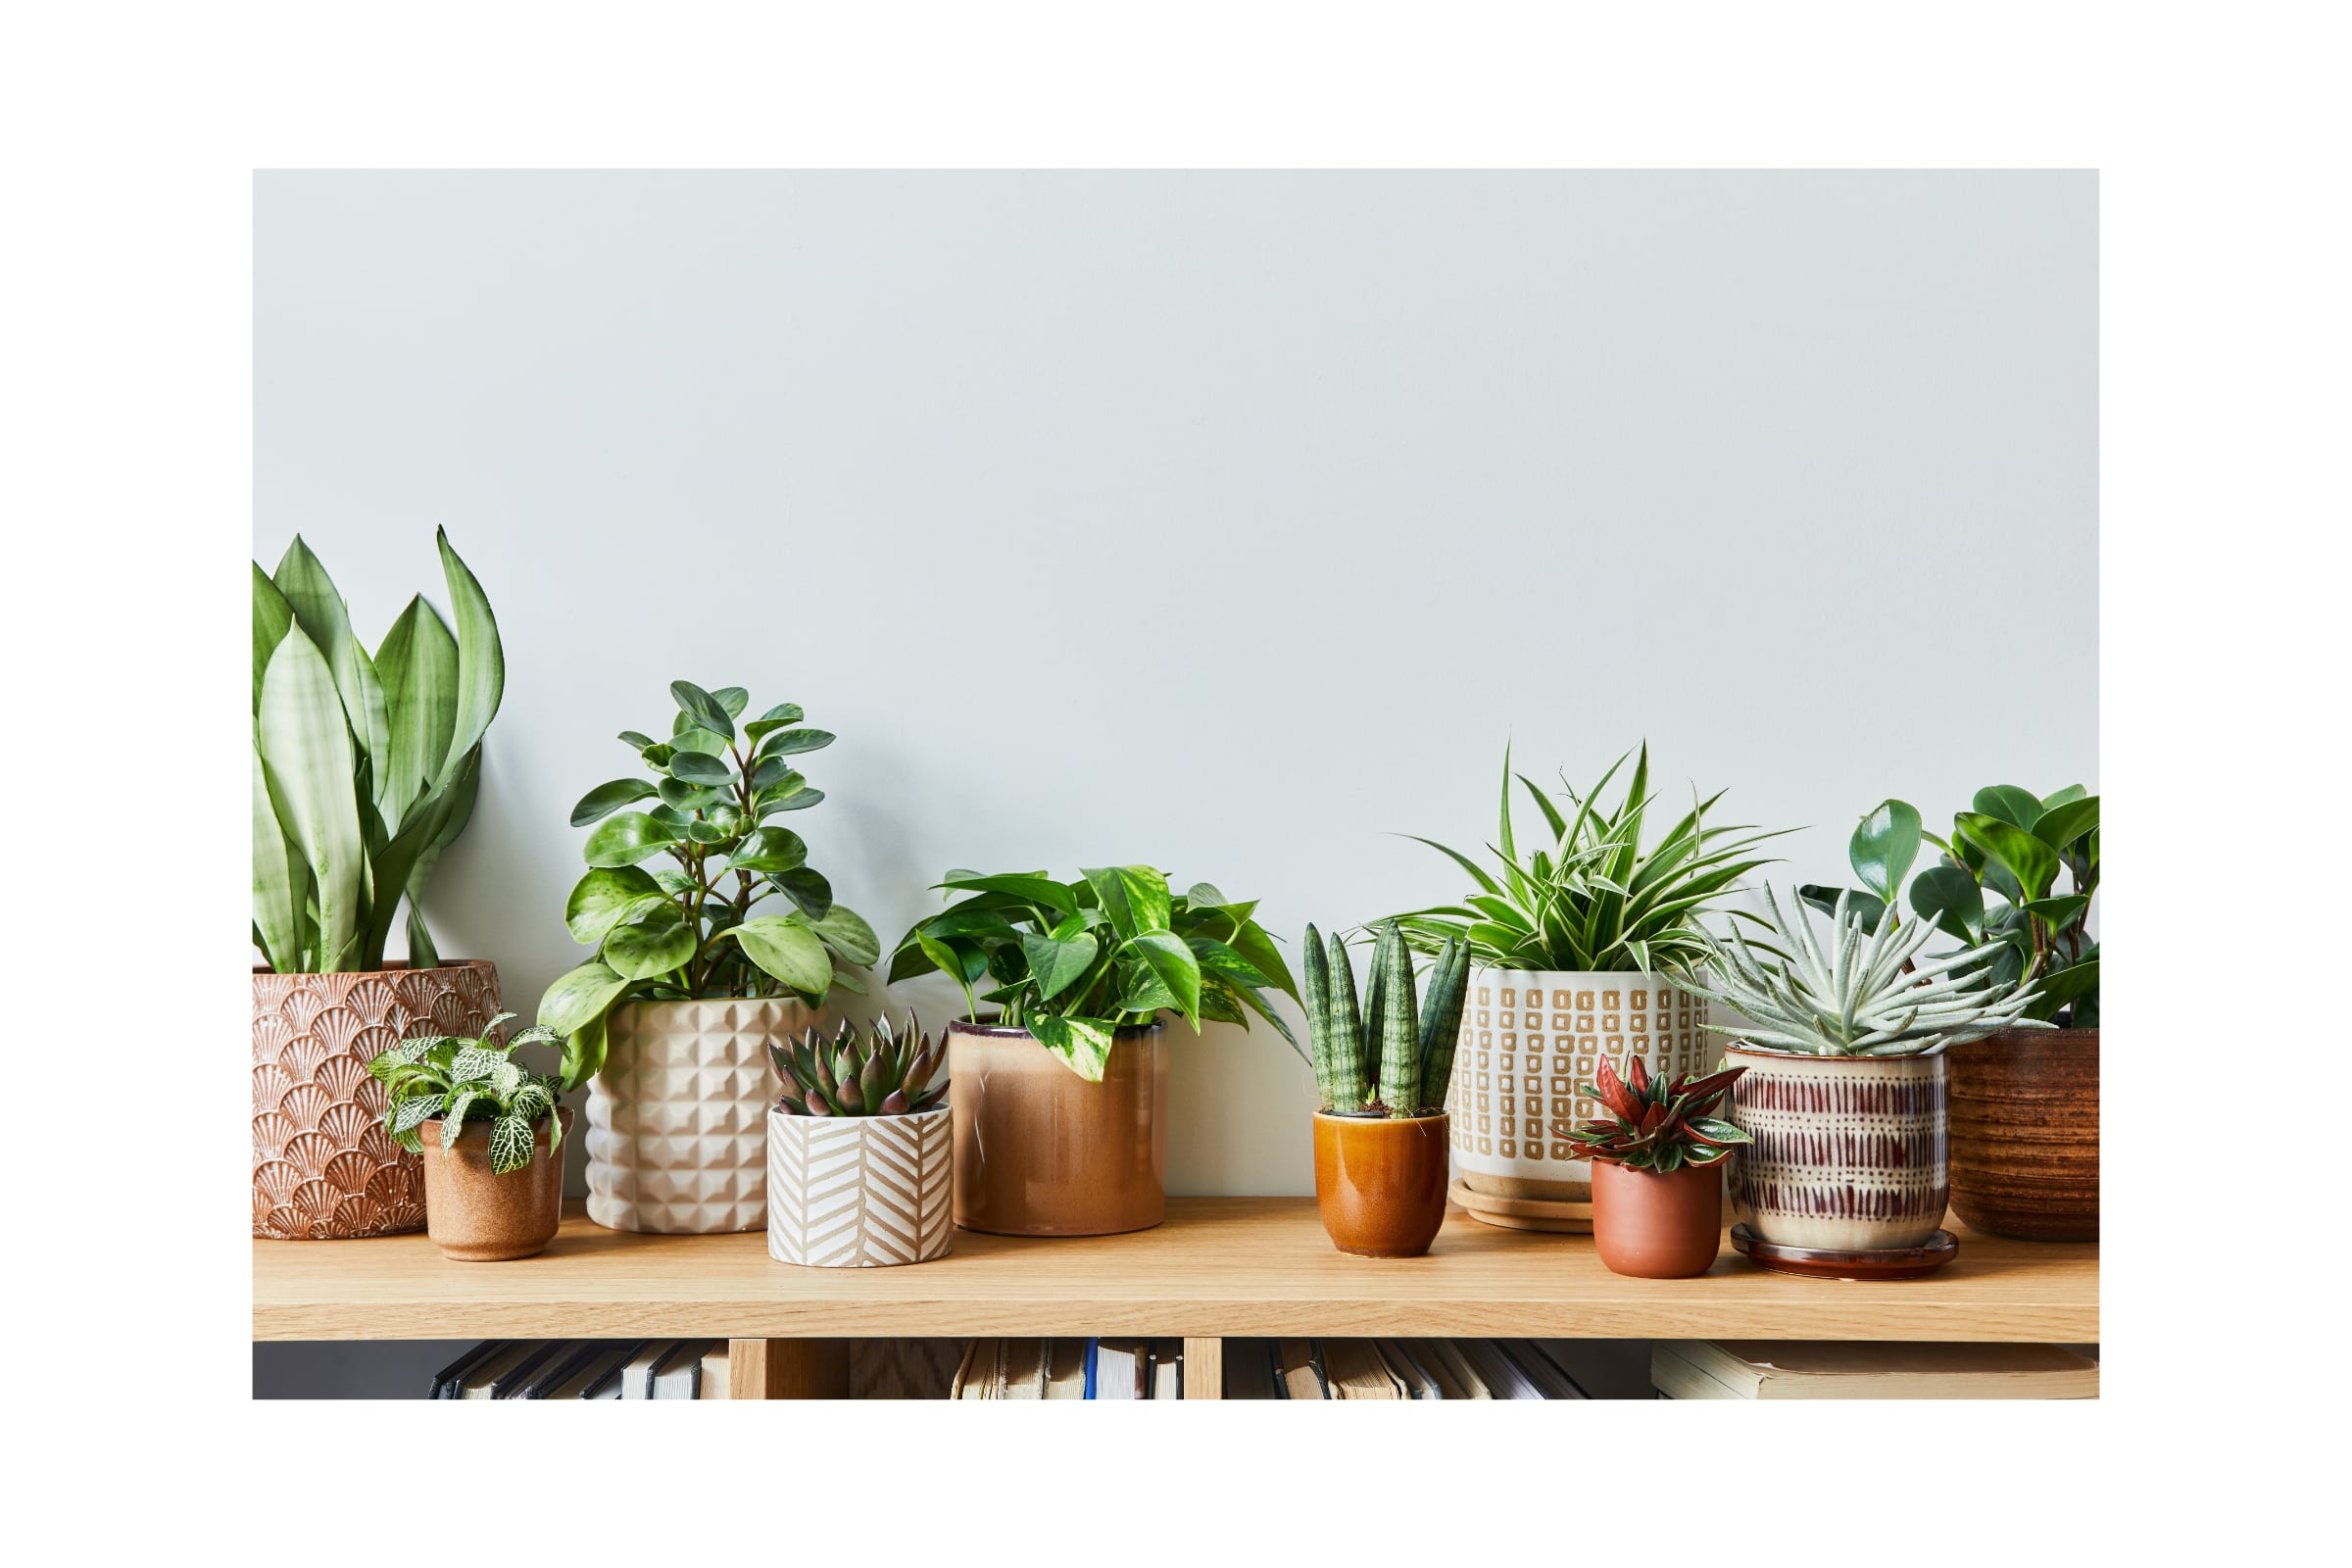 10 Low Light Houseplants for Any Room - Leaf Culture